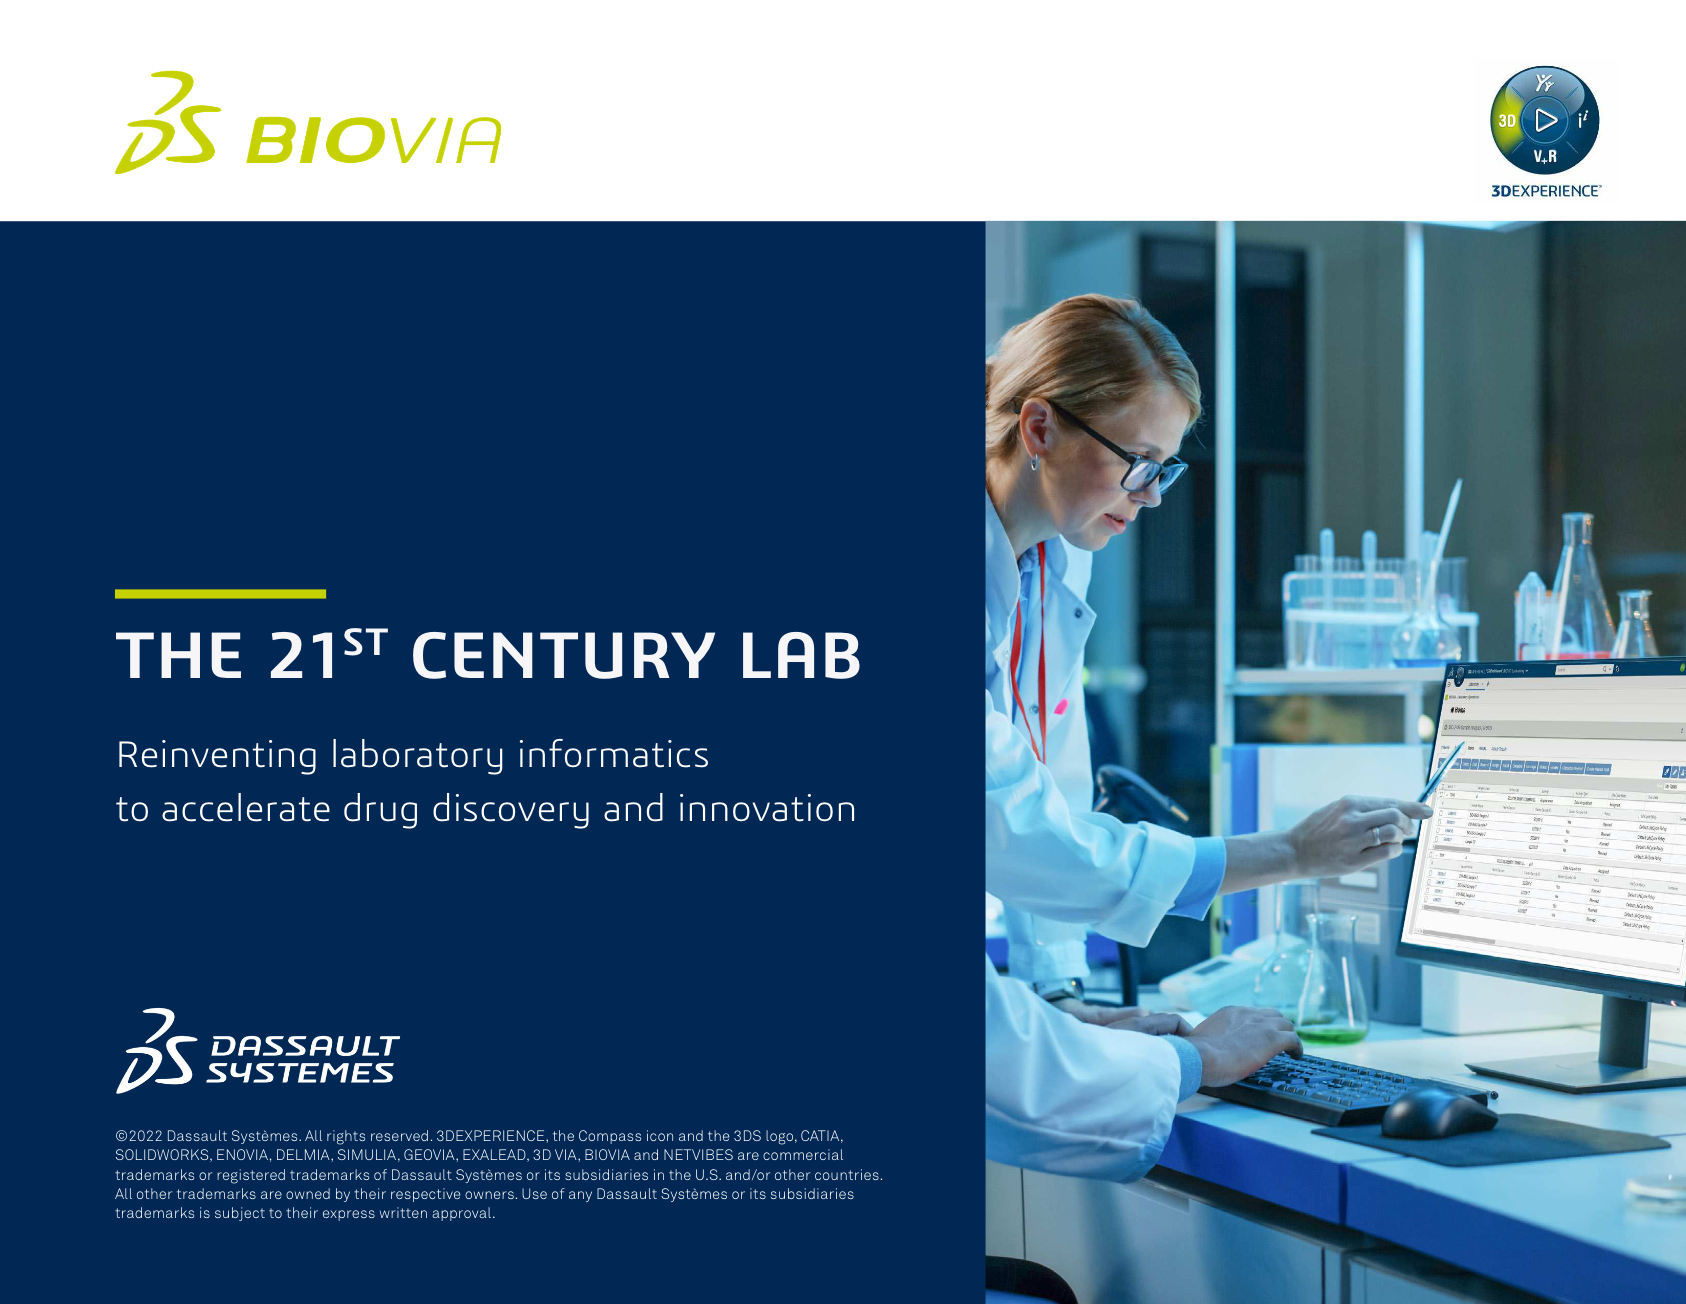 THE 21ST CENTURY LAB: Reinventing laboratory informatics to accelerate drug discovery and innovation